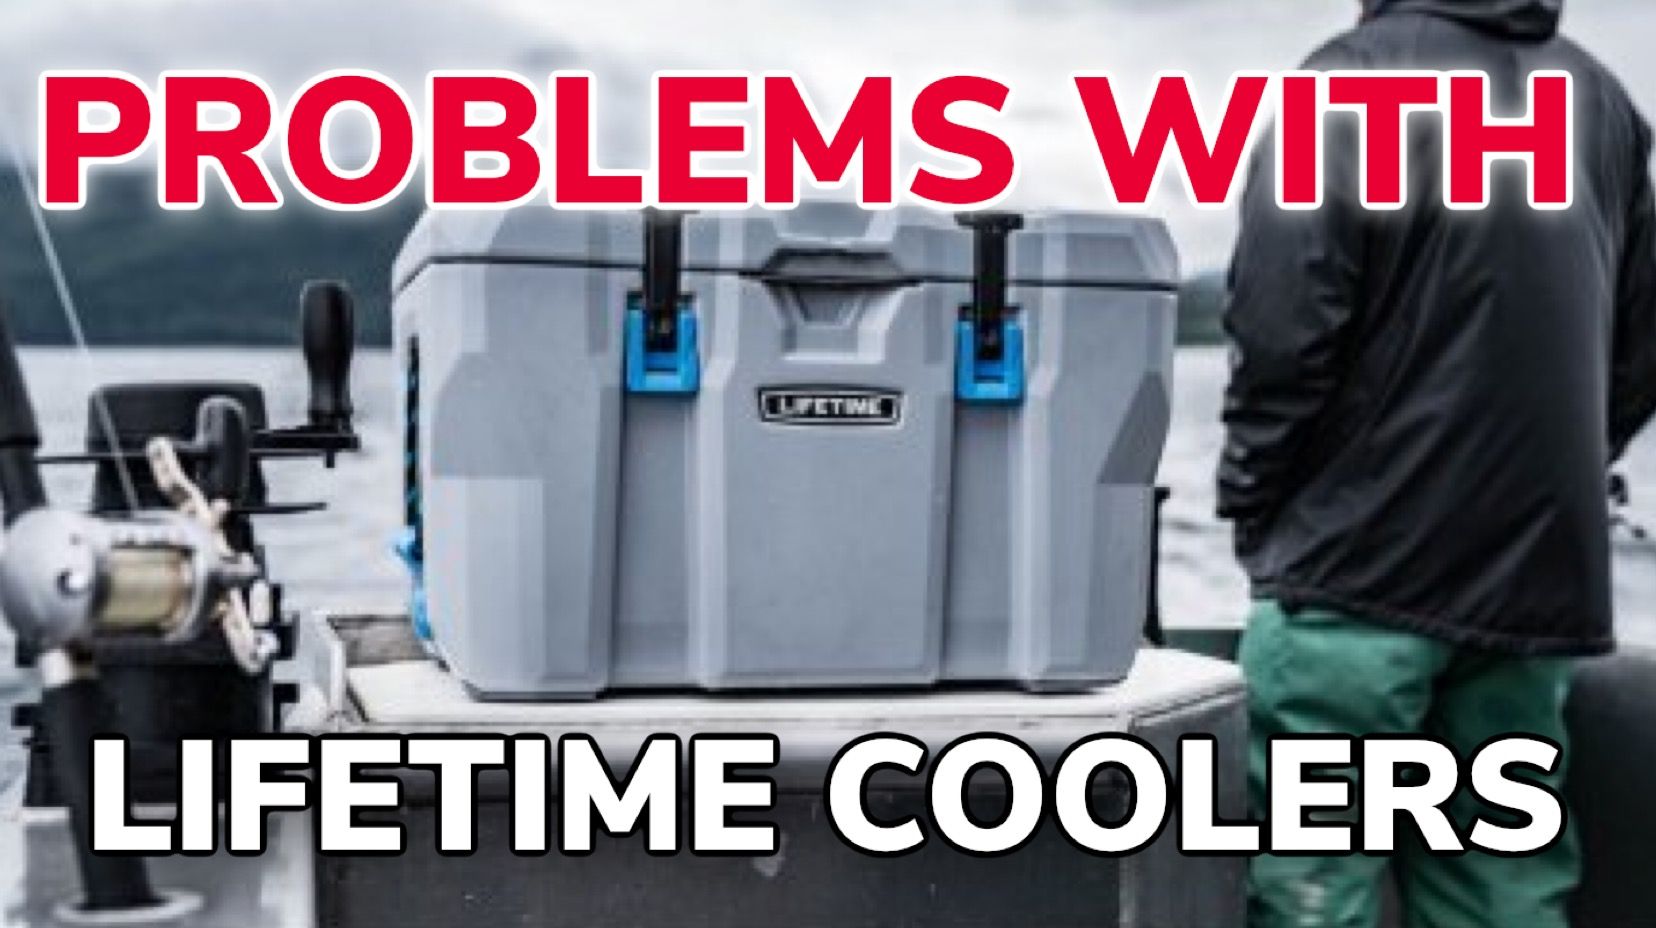 Problems With Lifetime Coolers